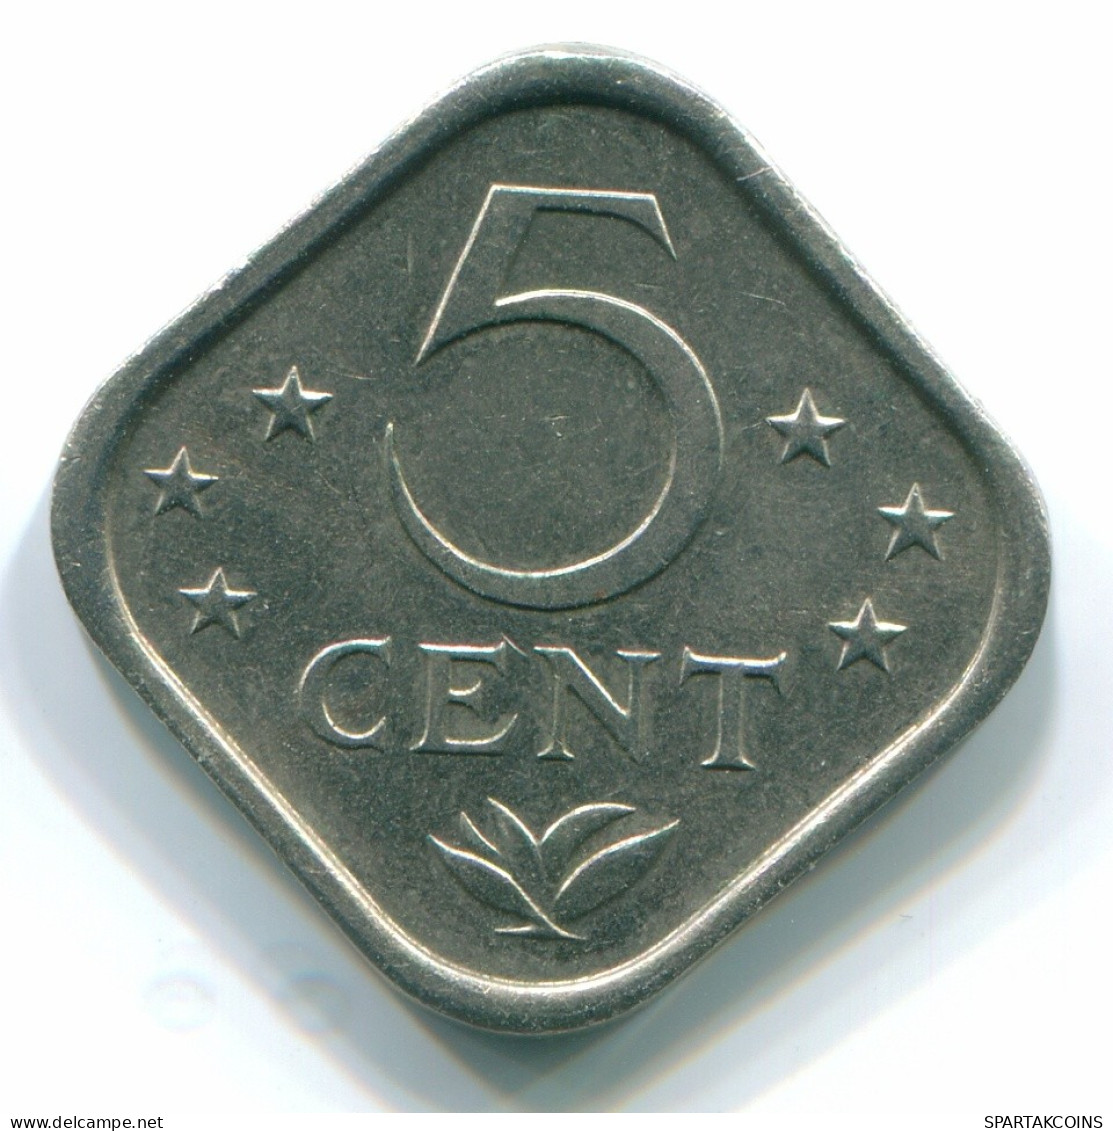 5 CENTS 1979 NETHERLANDS ANTILLES Nickel Colonial Coin #S12295.U.A - Netherlands Antilles